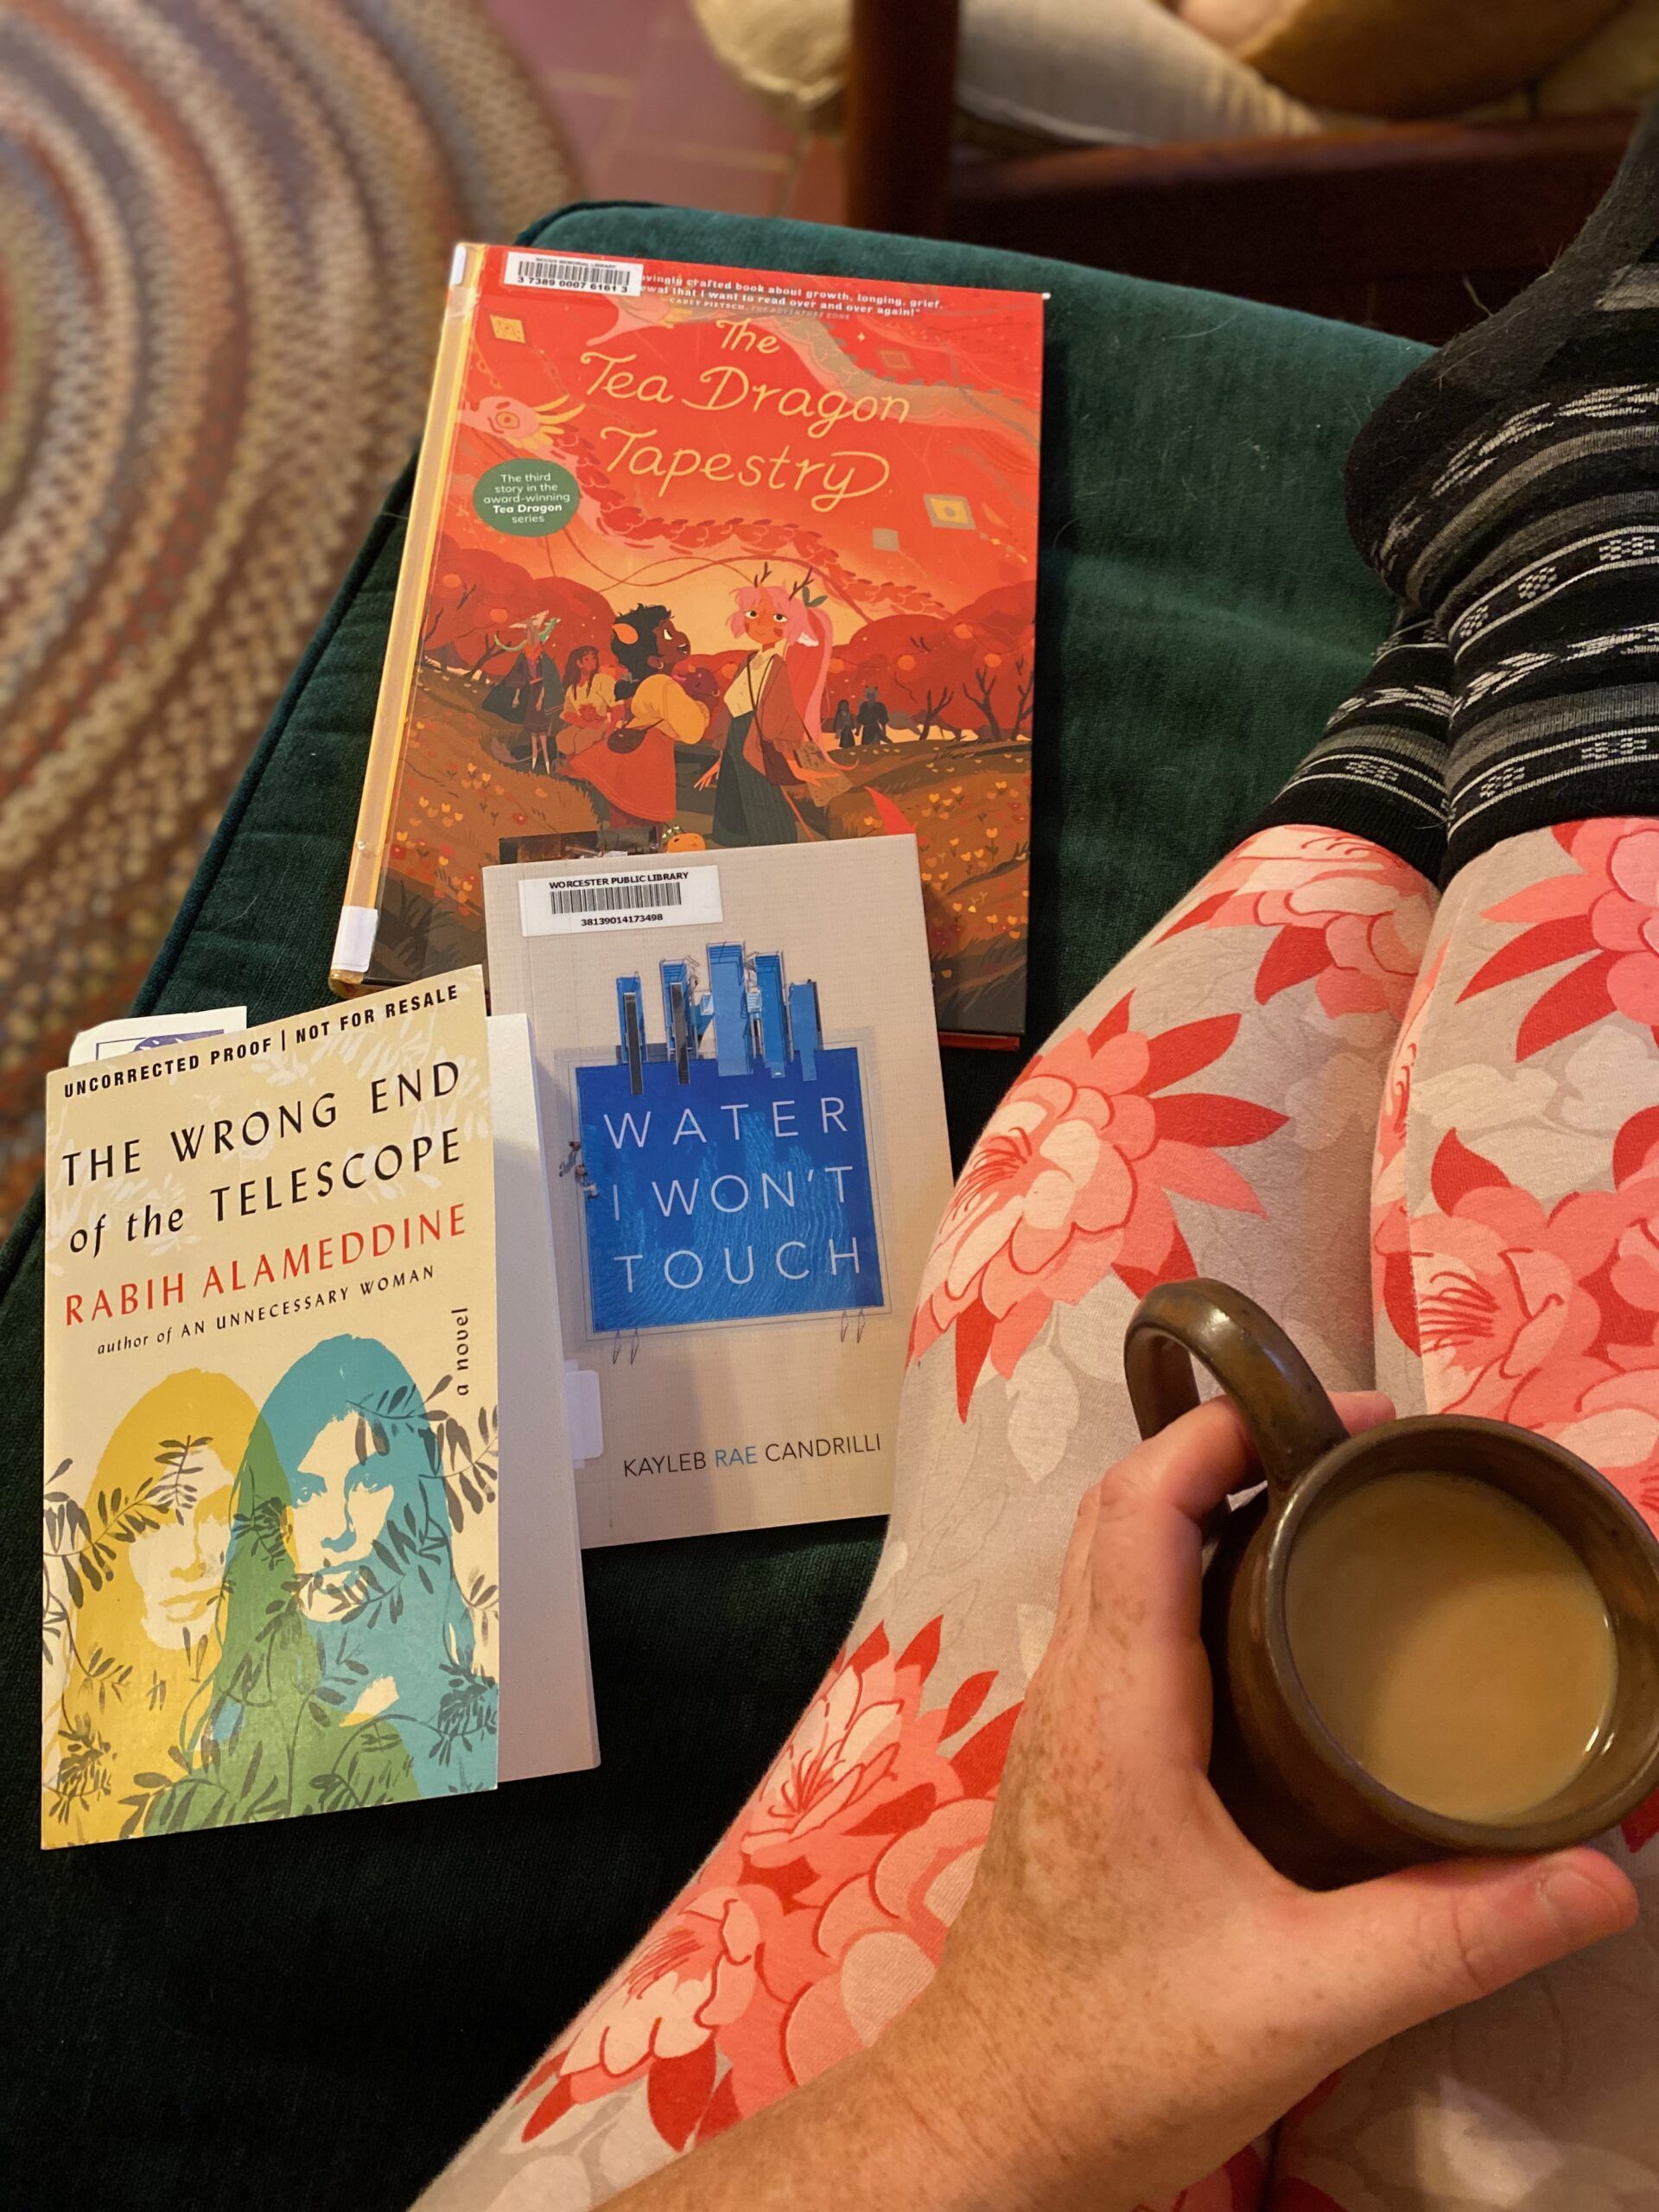 Image of my legs stretched out on a green couch. I am wearing leggings with large red flowers on them and holding a mug of tea. Three books ar on the couch next to me: The Tea Dragon Tapestry, Water I Won't Touch, and The Wrong End of the Telescope. Photo by me.